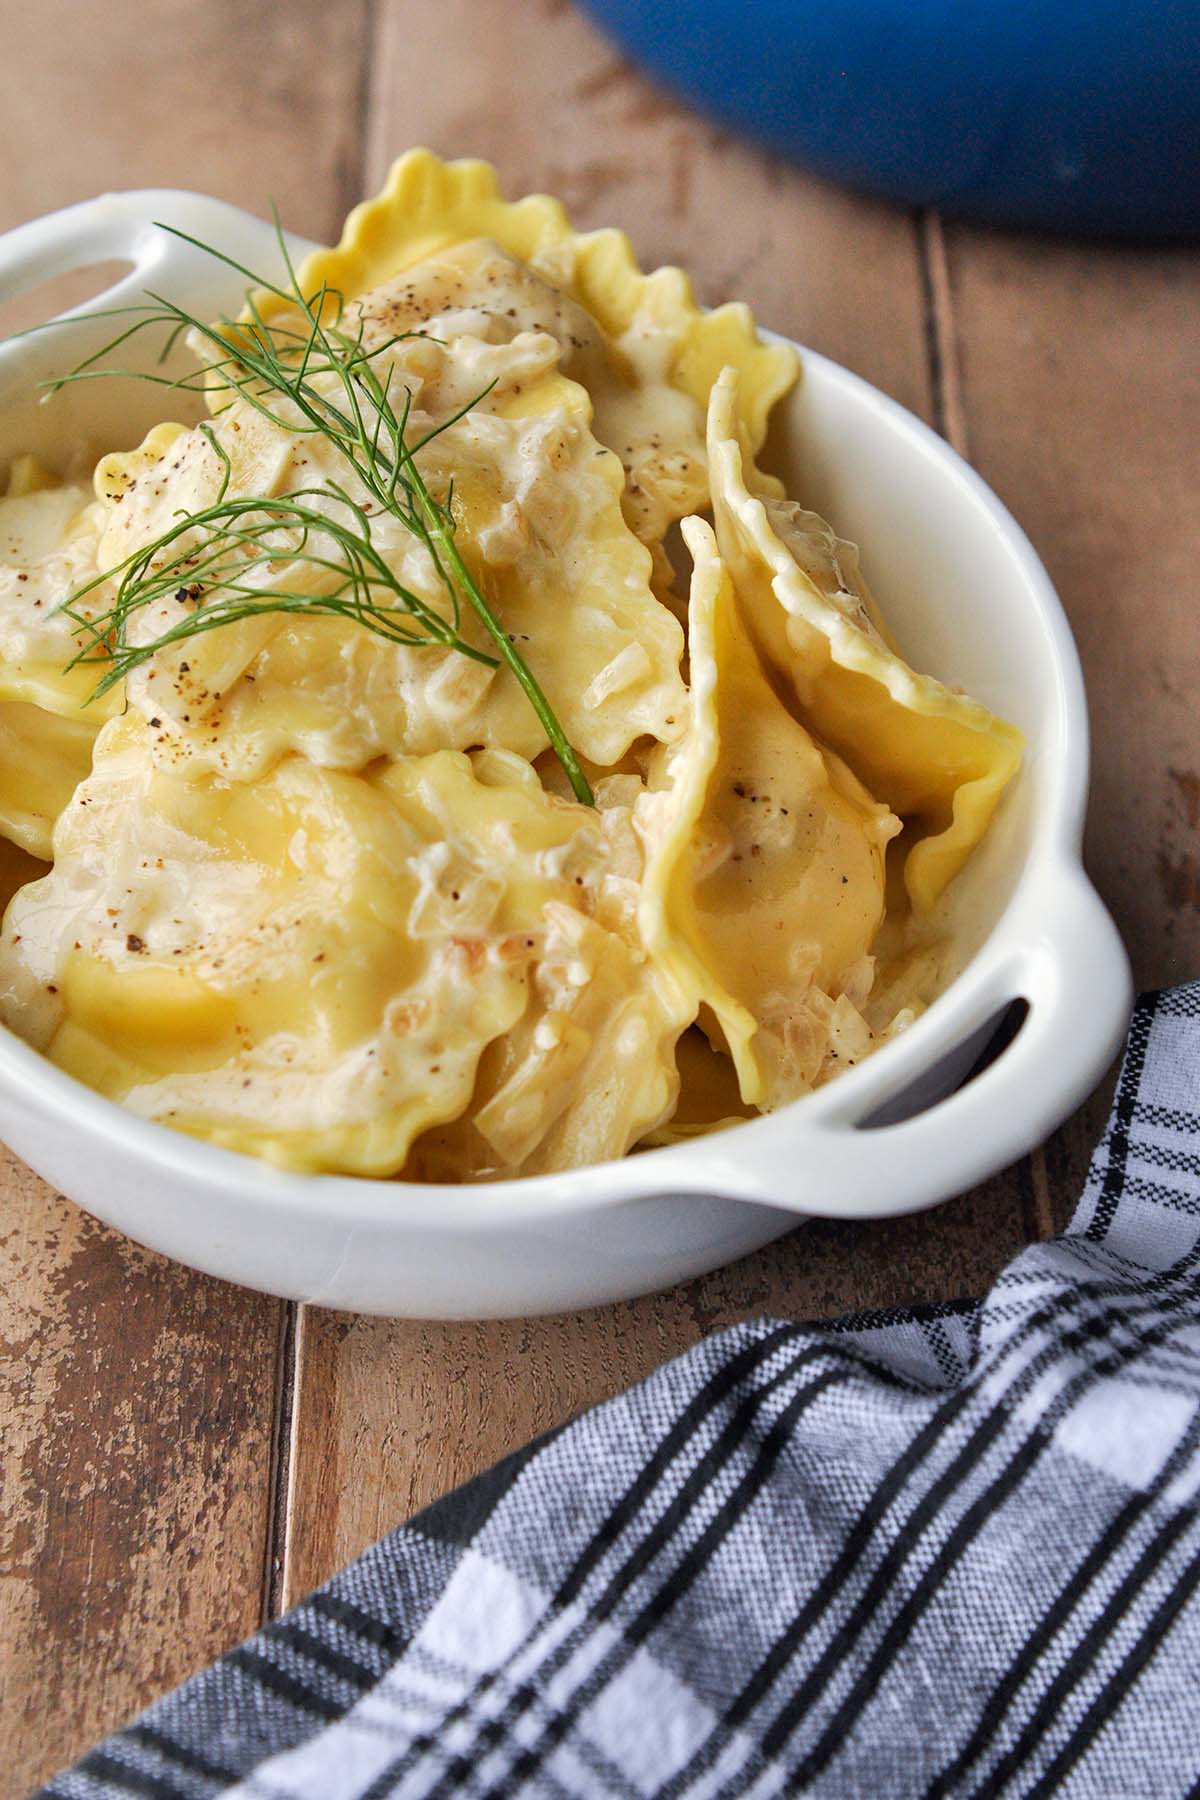 A bowl full of lobster ravioli with creamy sauce and a little sprig of fennel.